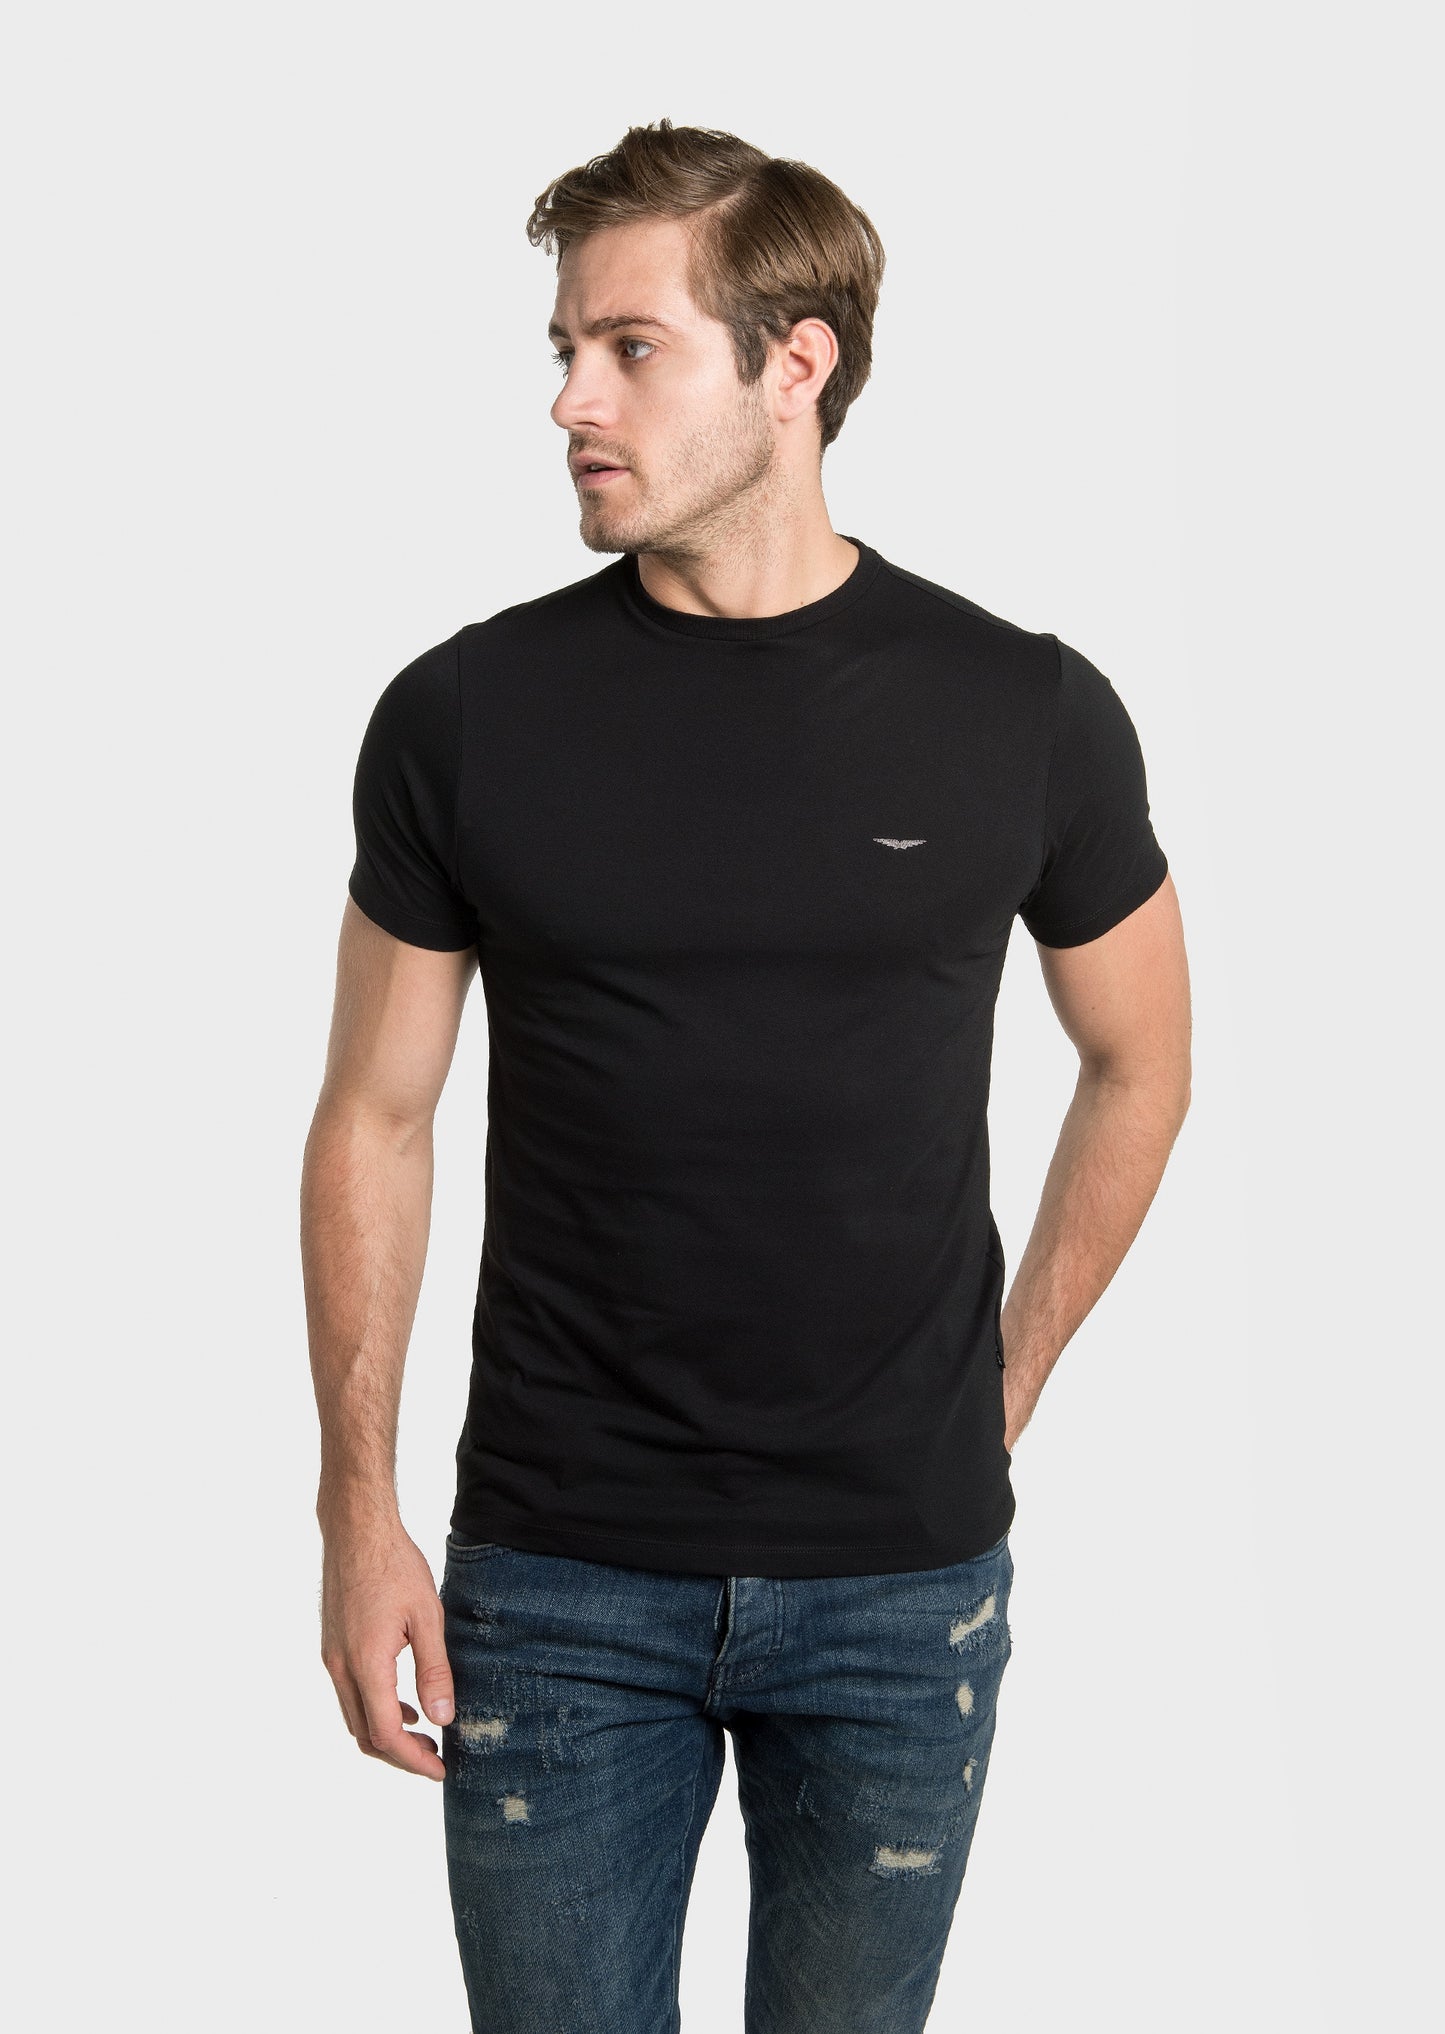 883 Police Abbey Black Mens T-Shirts | 883 Police